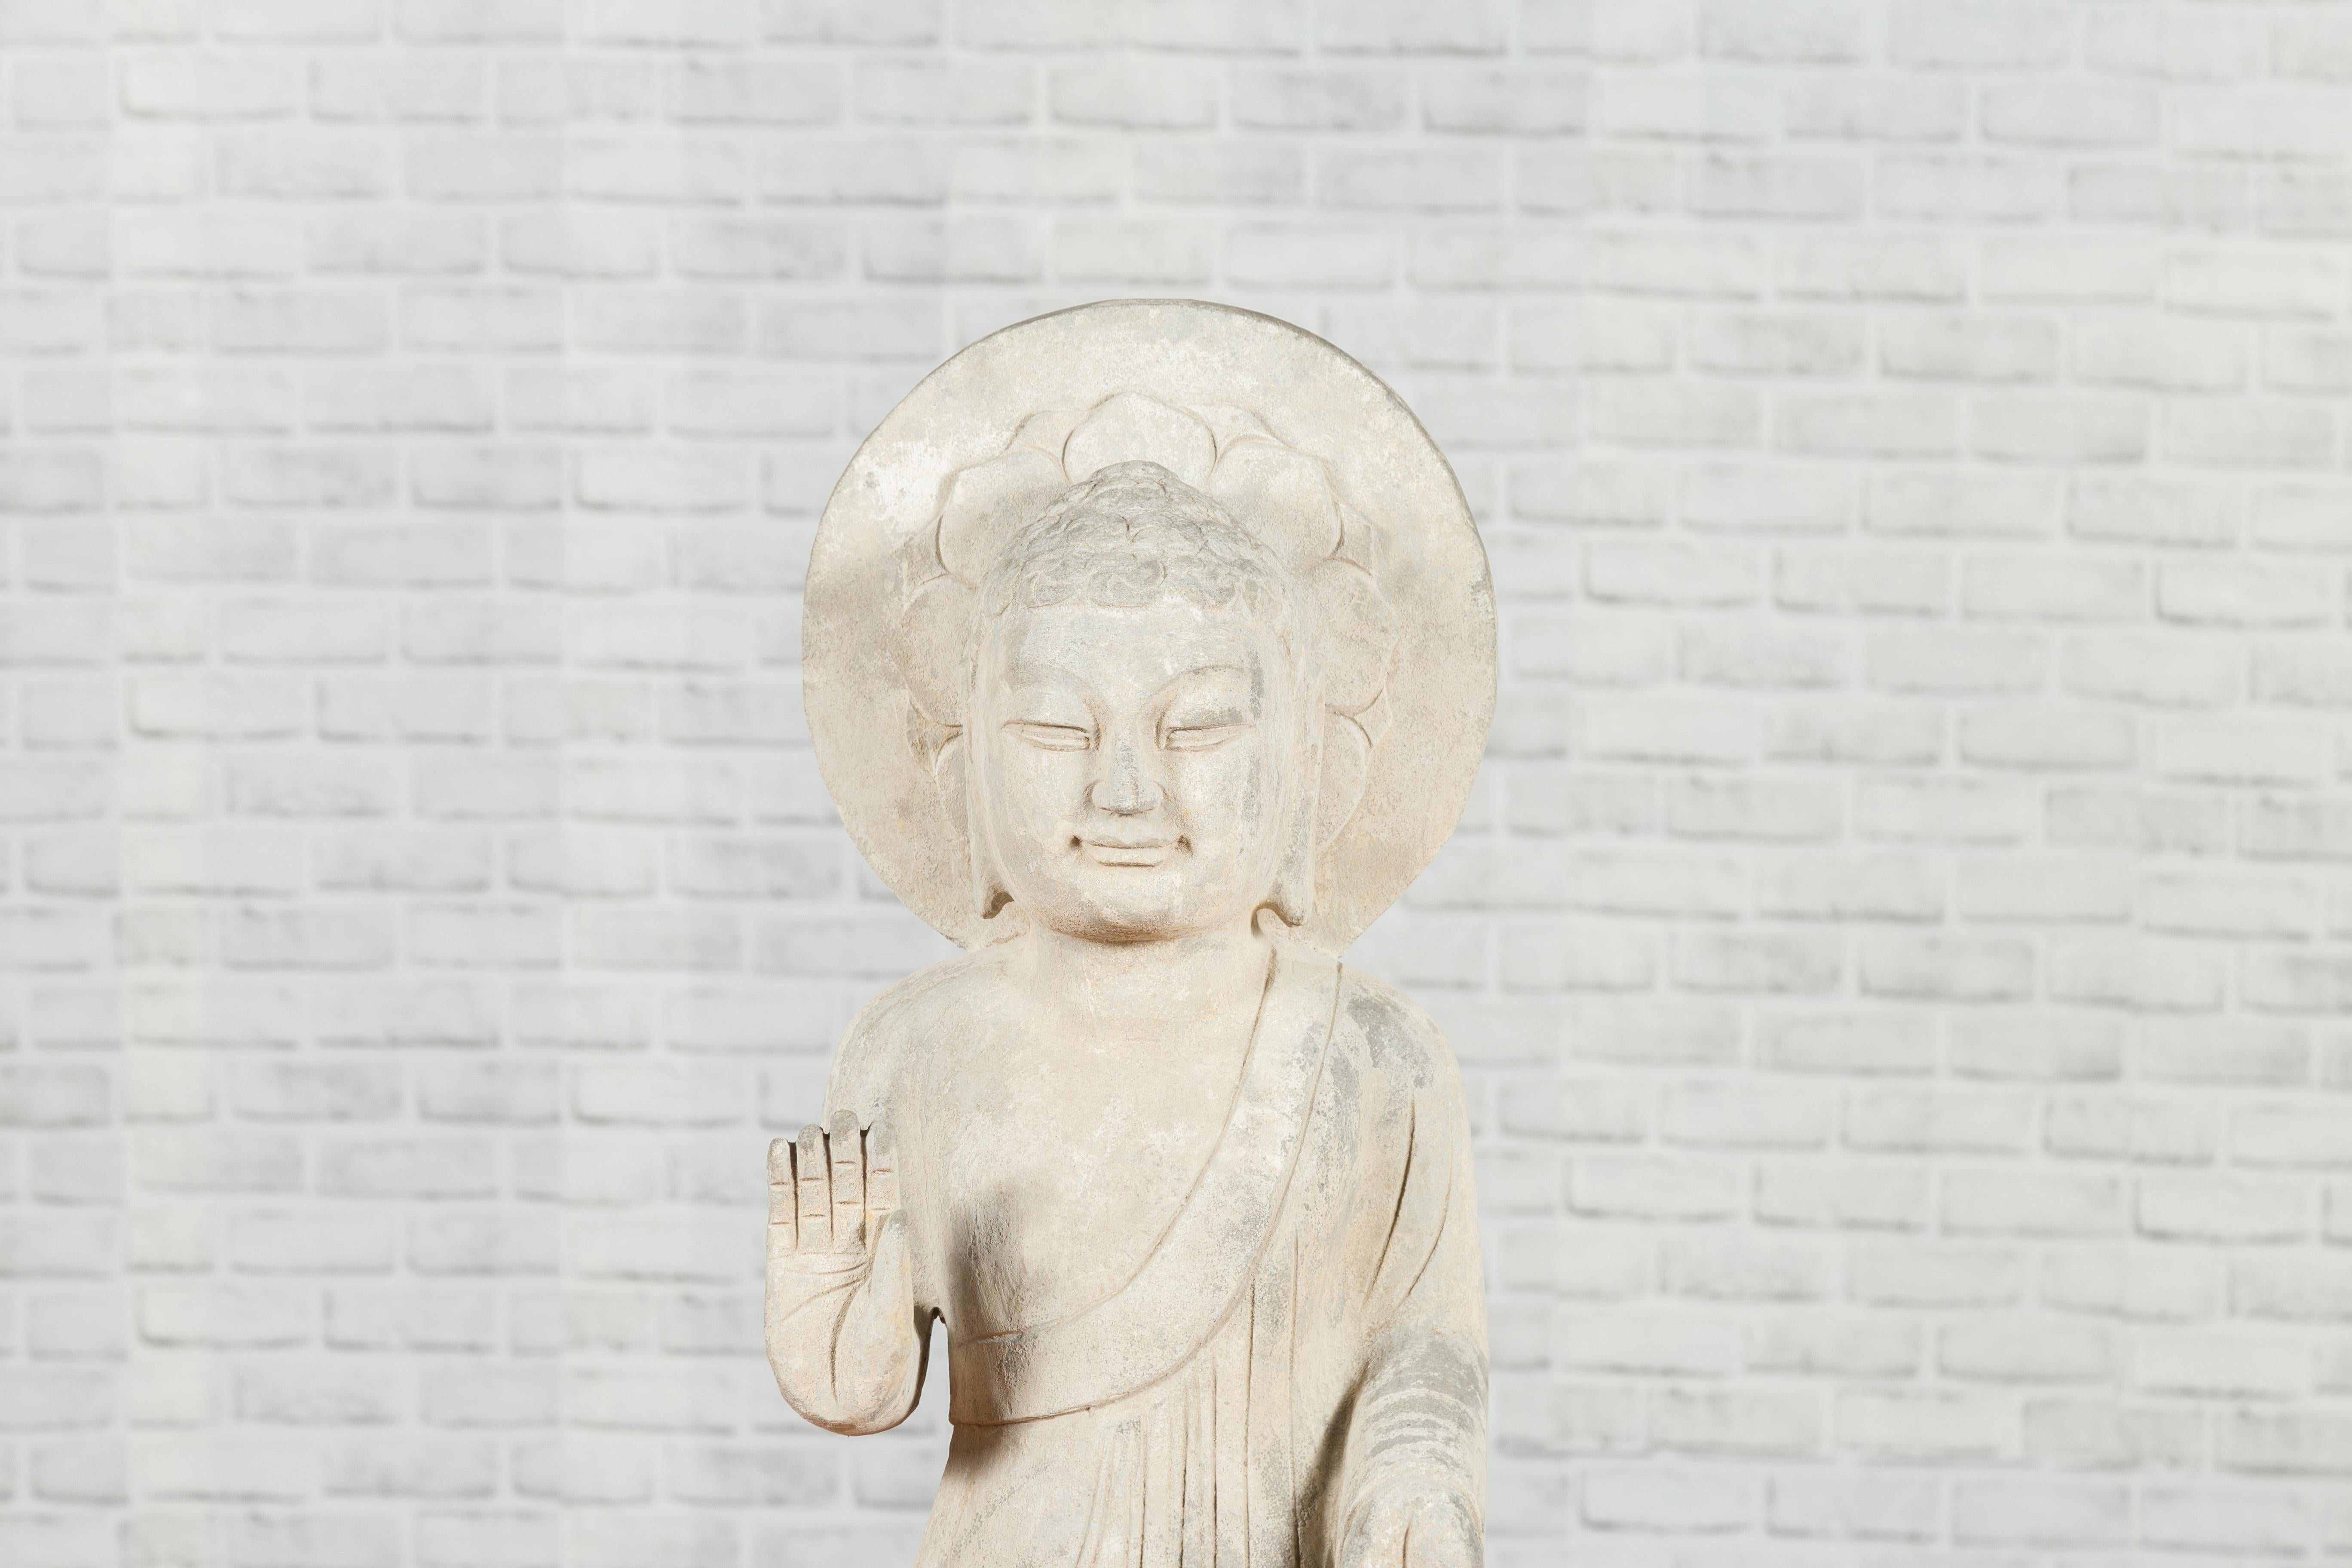 Carved Vintage Chinese Stone Standing Buddha with Abhayamudrā Gesture of Fearlessness